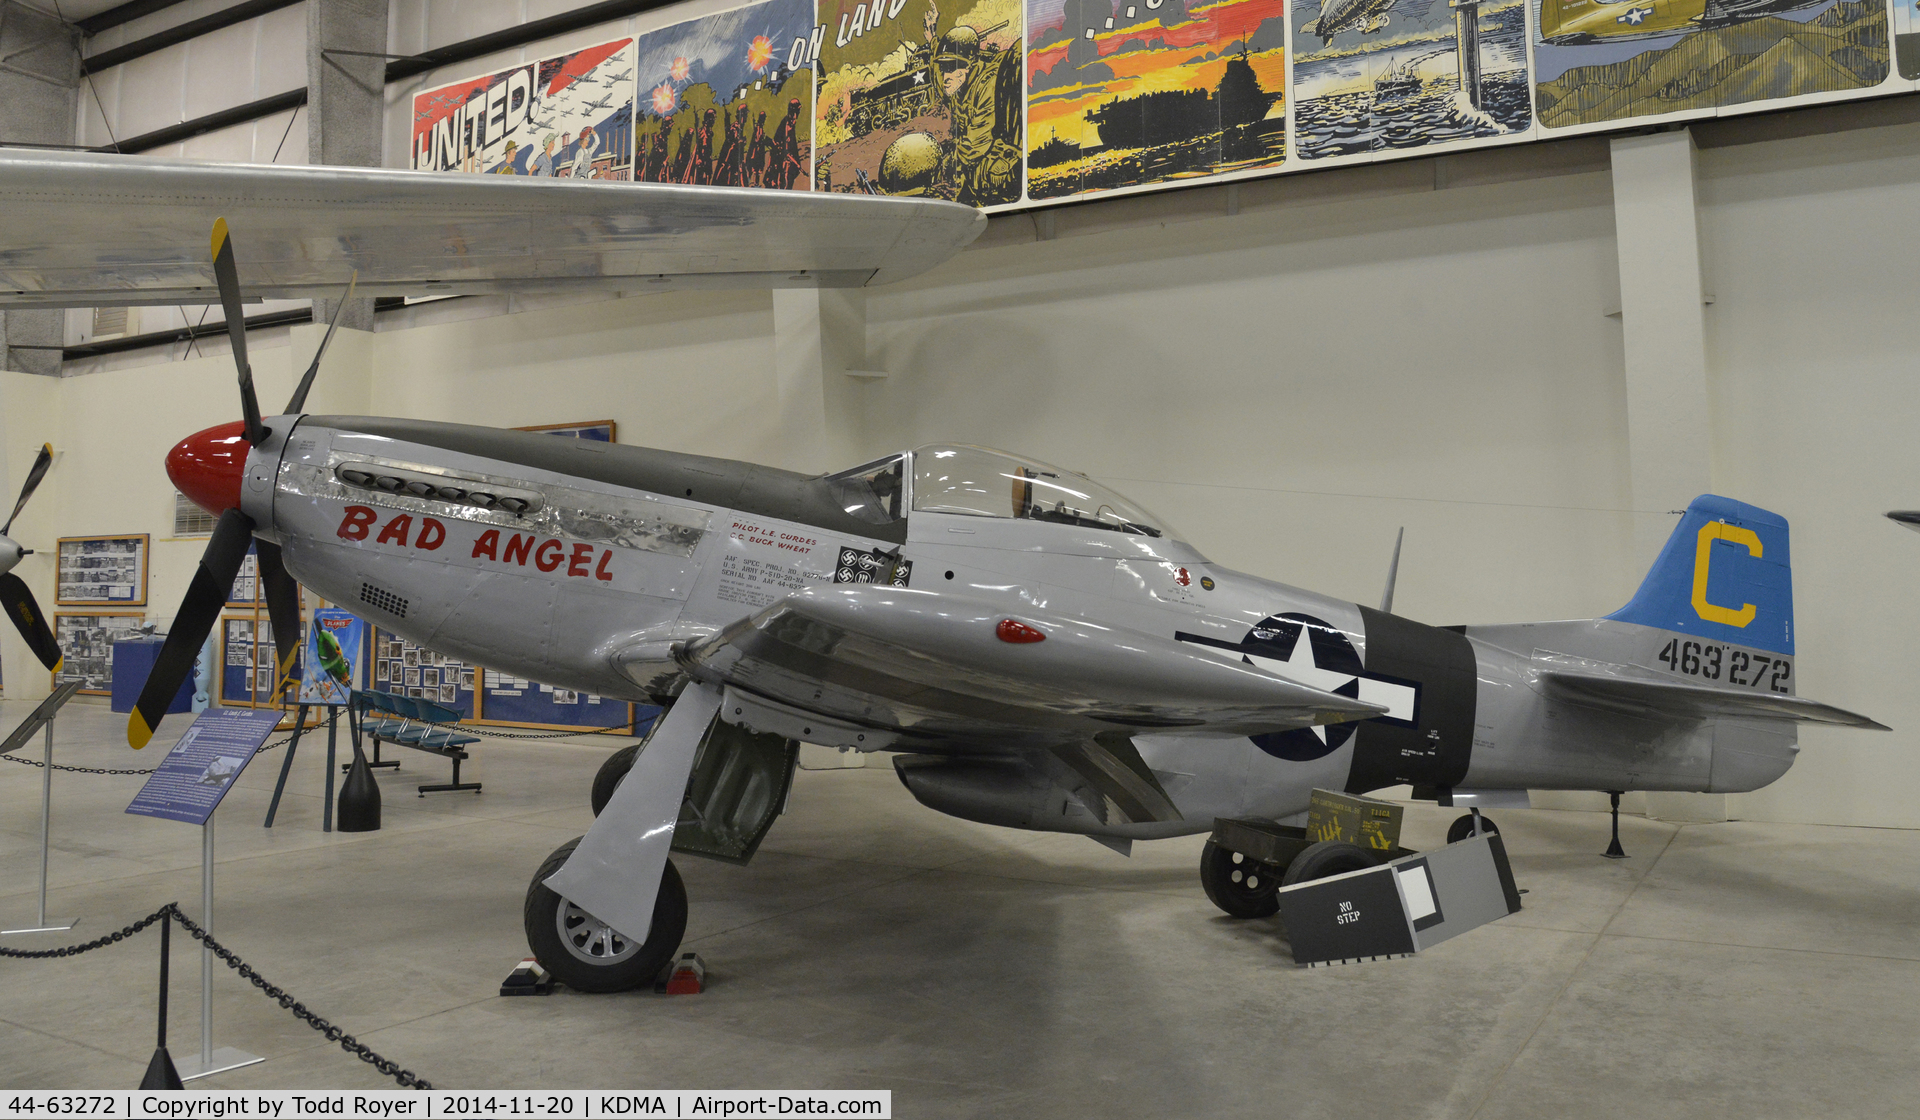 44-63272, North American P-51D Mustang C/N 122-30998, On Display at the Pima Air and Space Museum